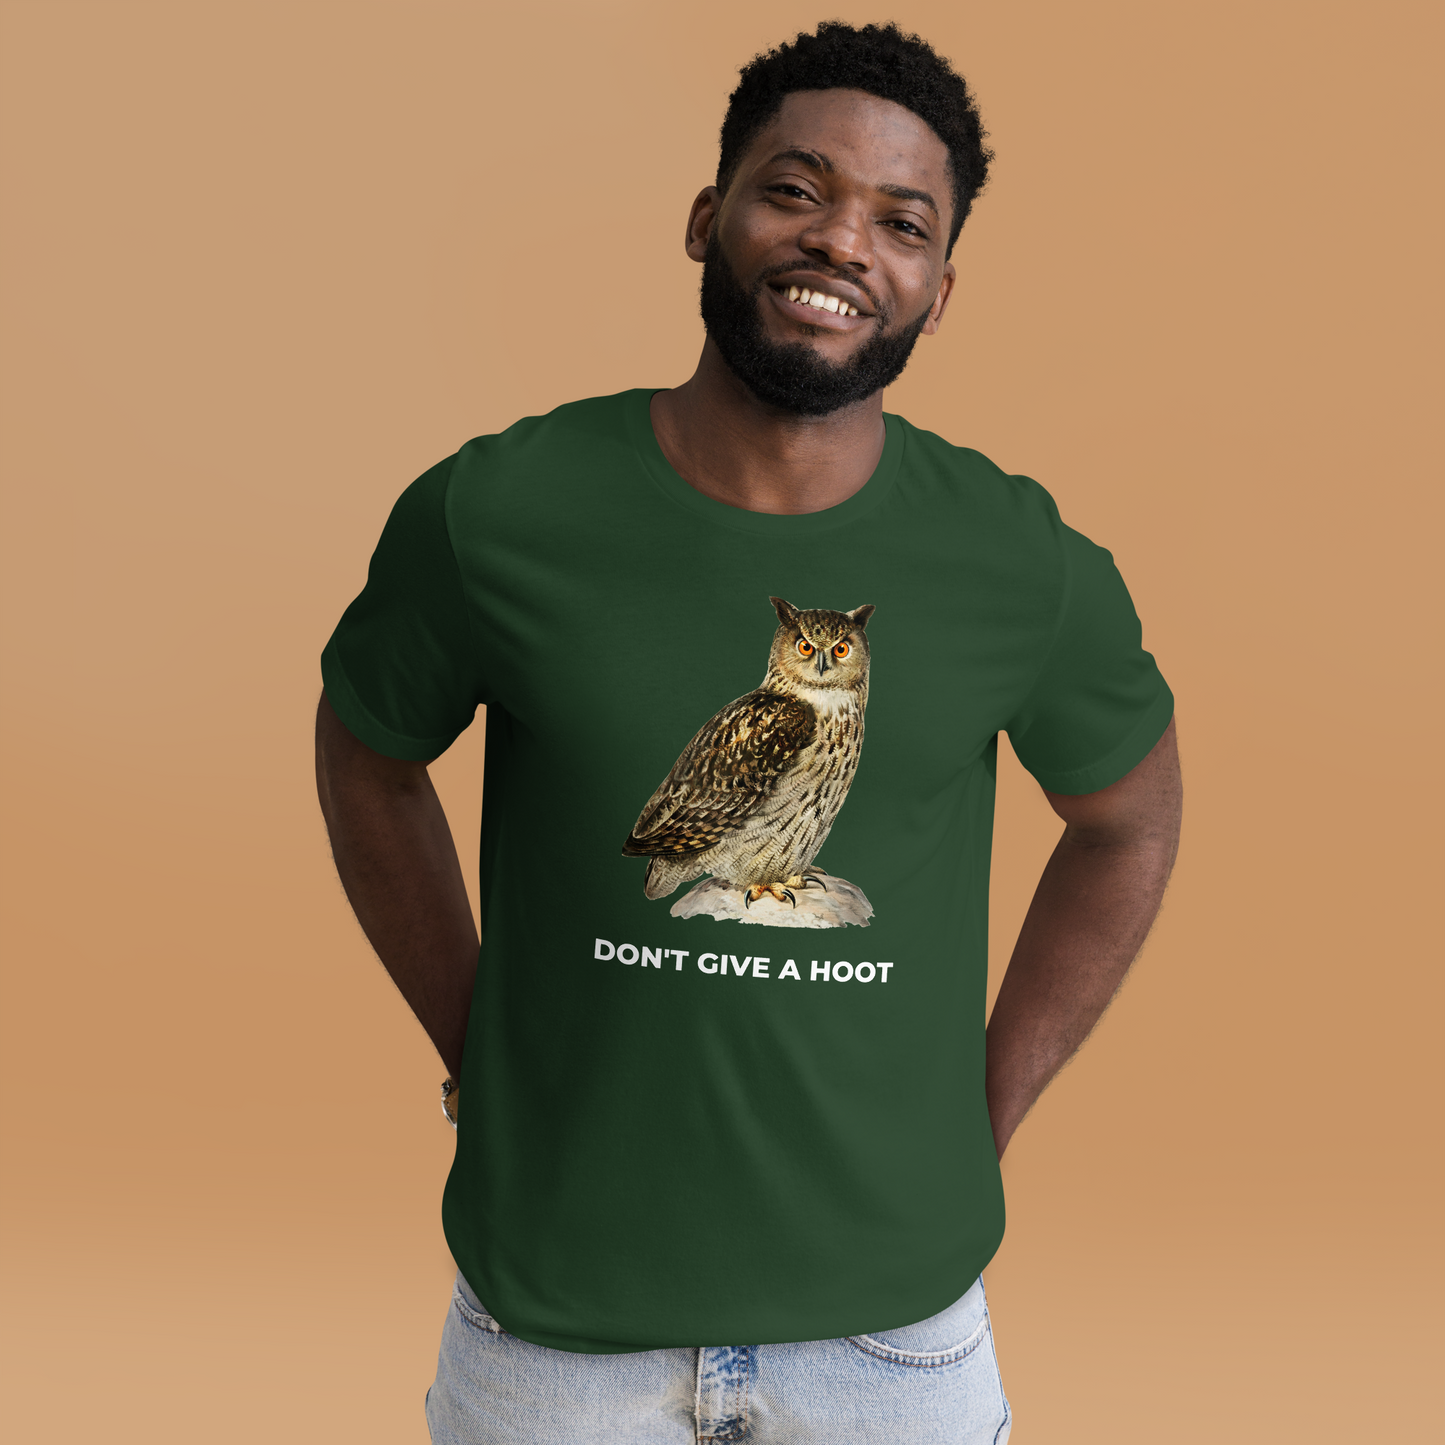 Smiling man wearing a Forest Green Premium Owl T-Shirt featuring a captivating Don't Give A Hoot graphic on the chest - Funny Graphic Owl Tees - Boozy Fox